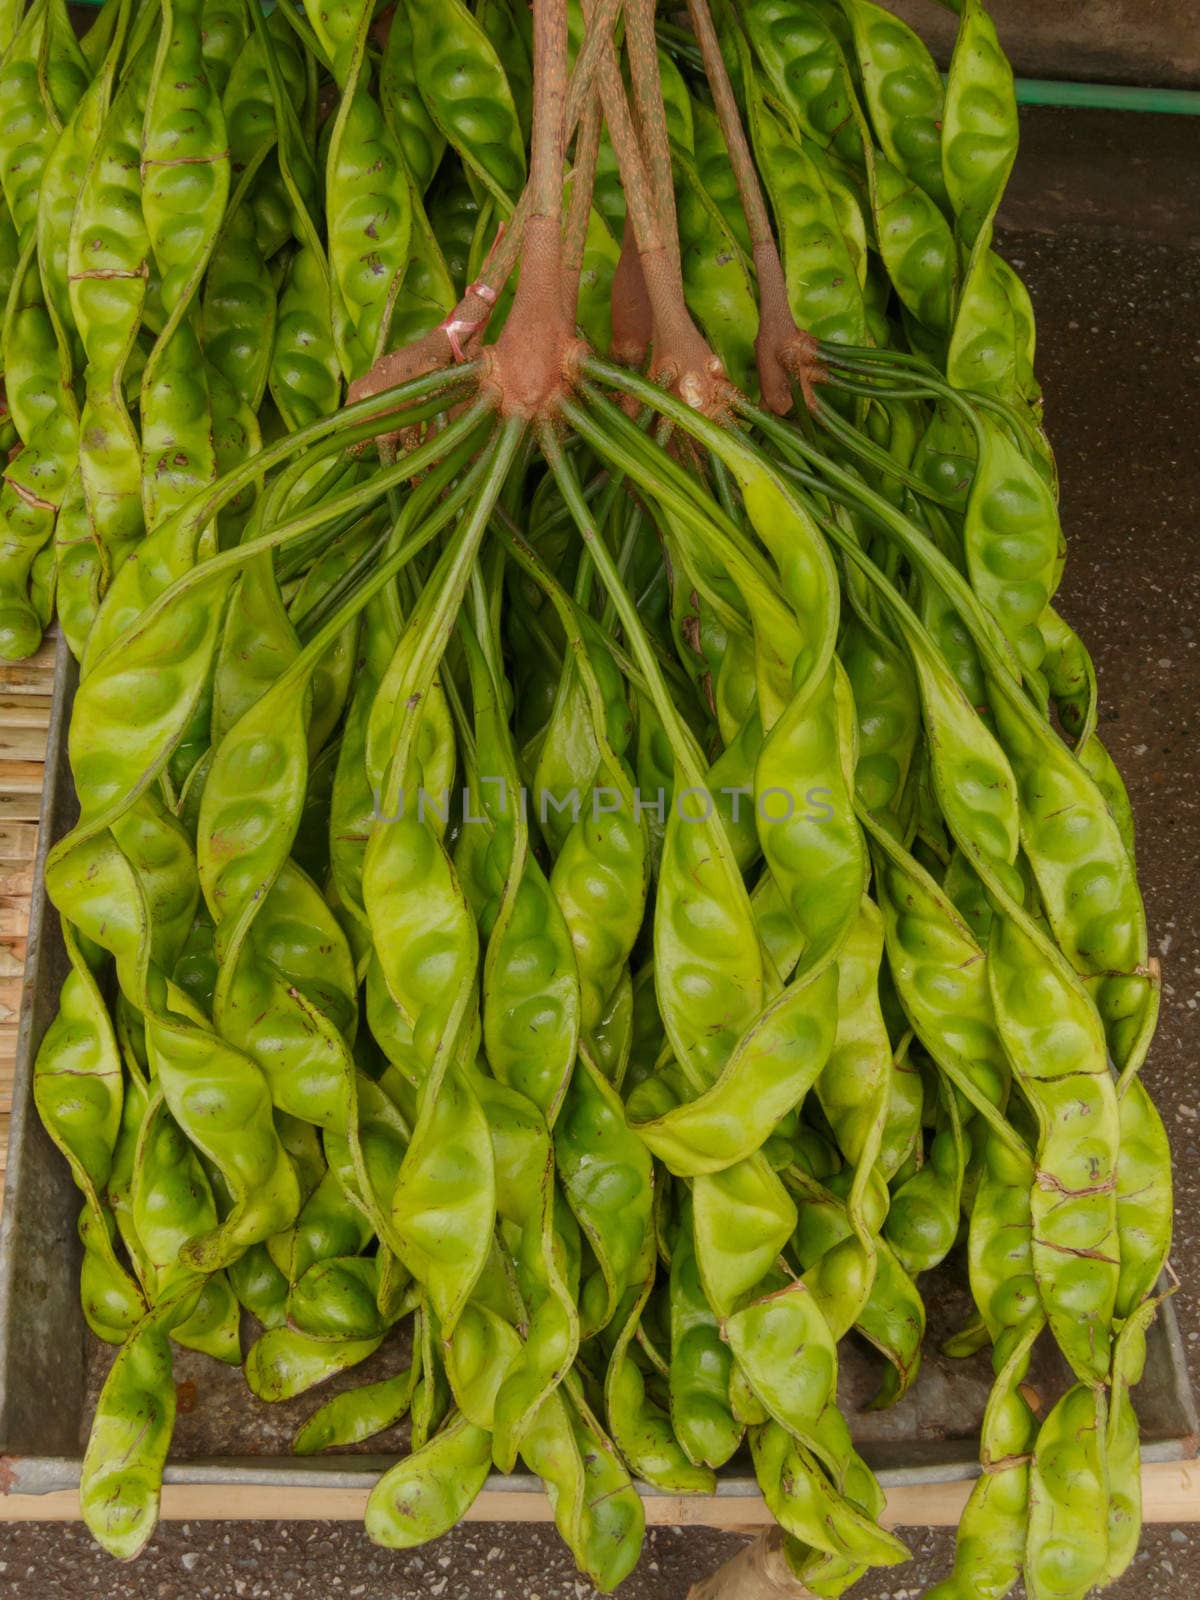 Parkia is tropical stinking edible beans in local market Thailand by ngungfoto